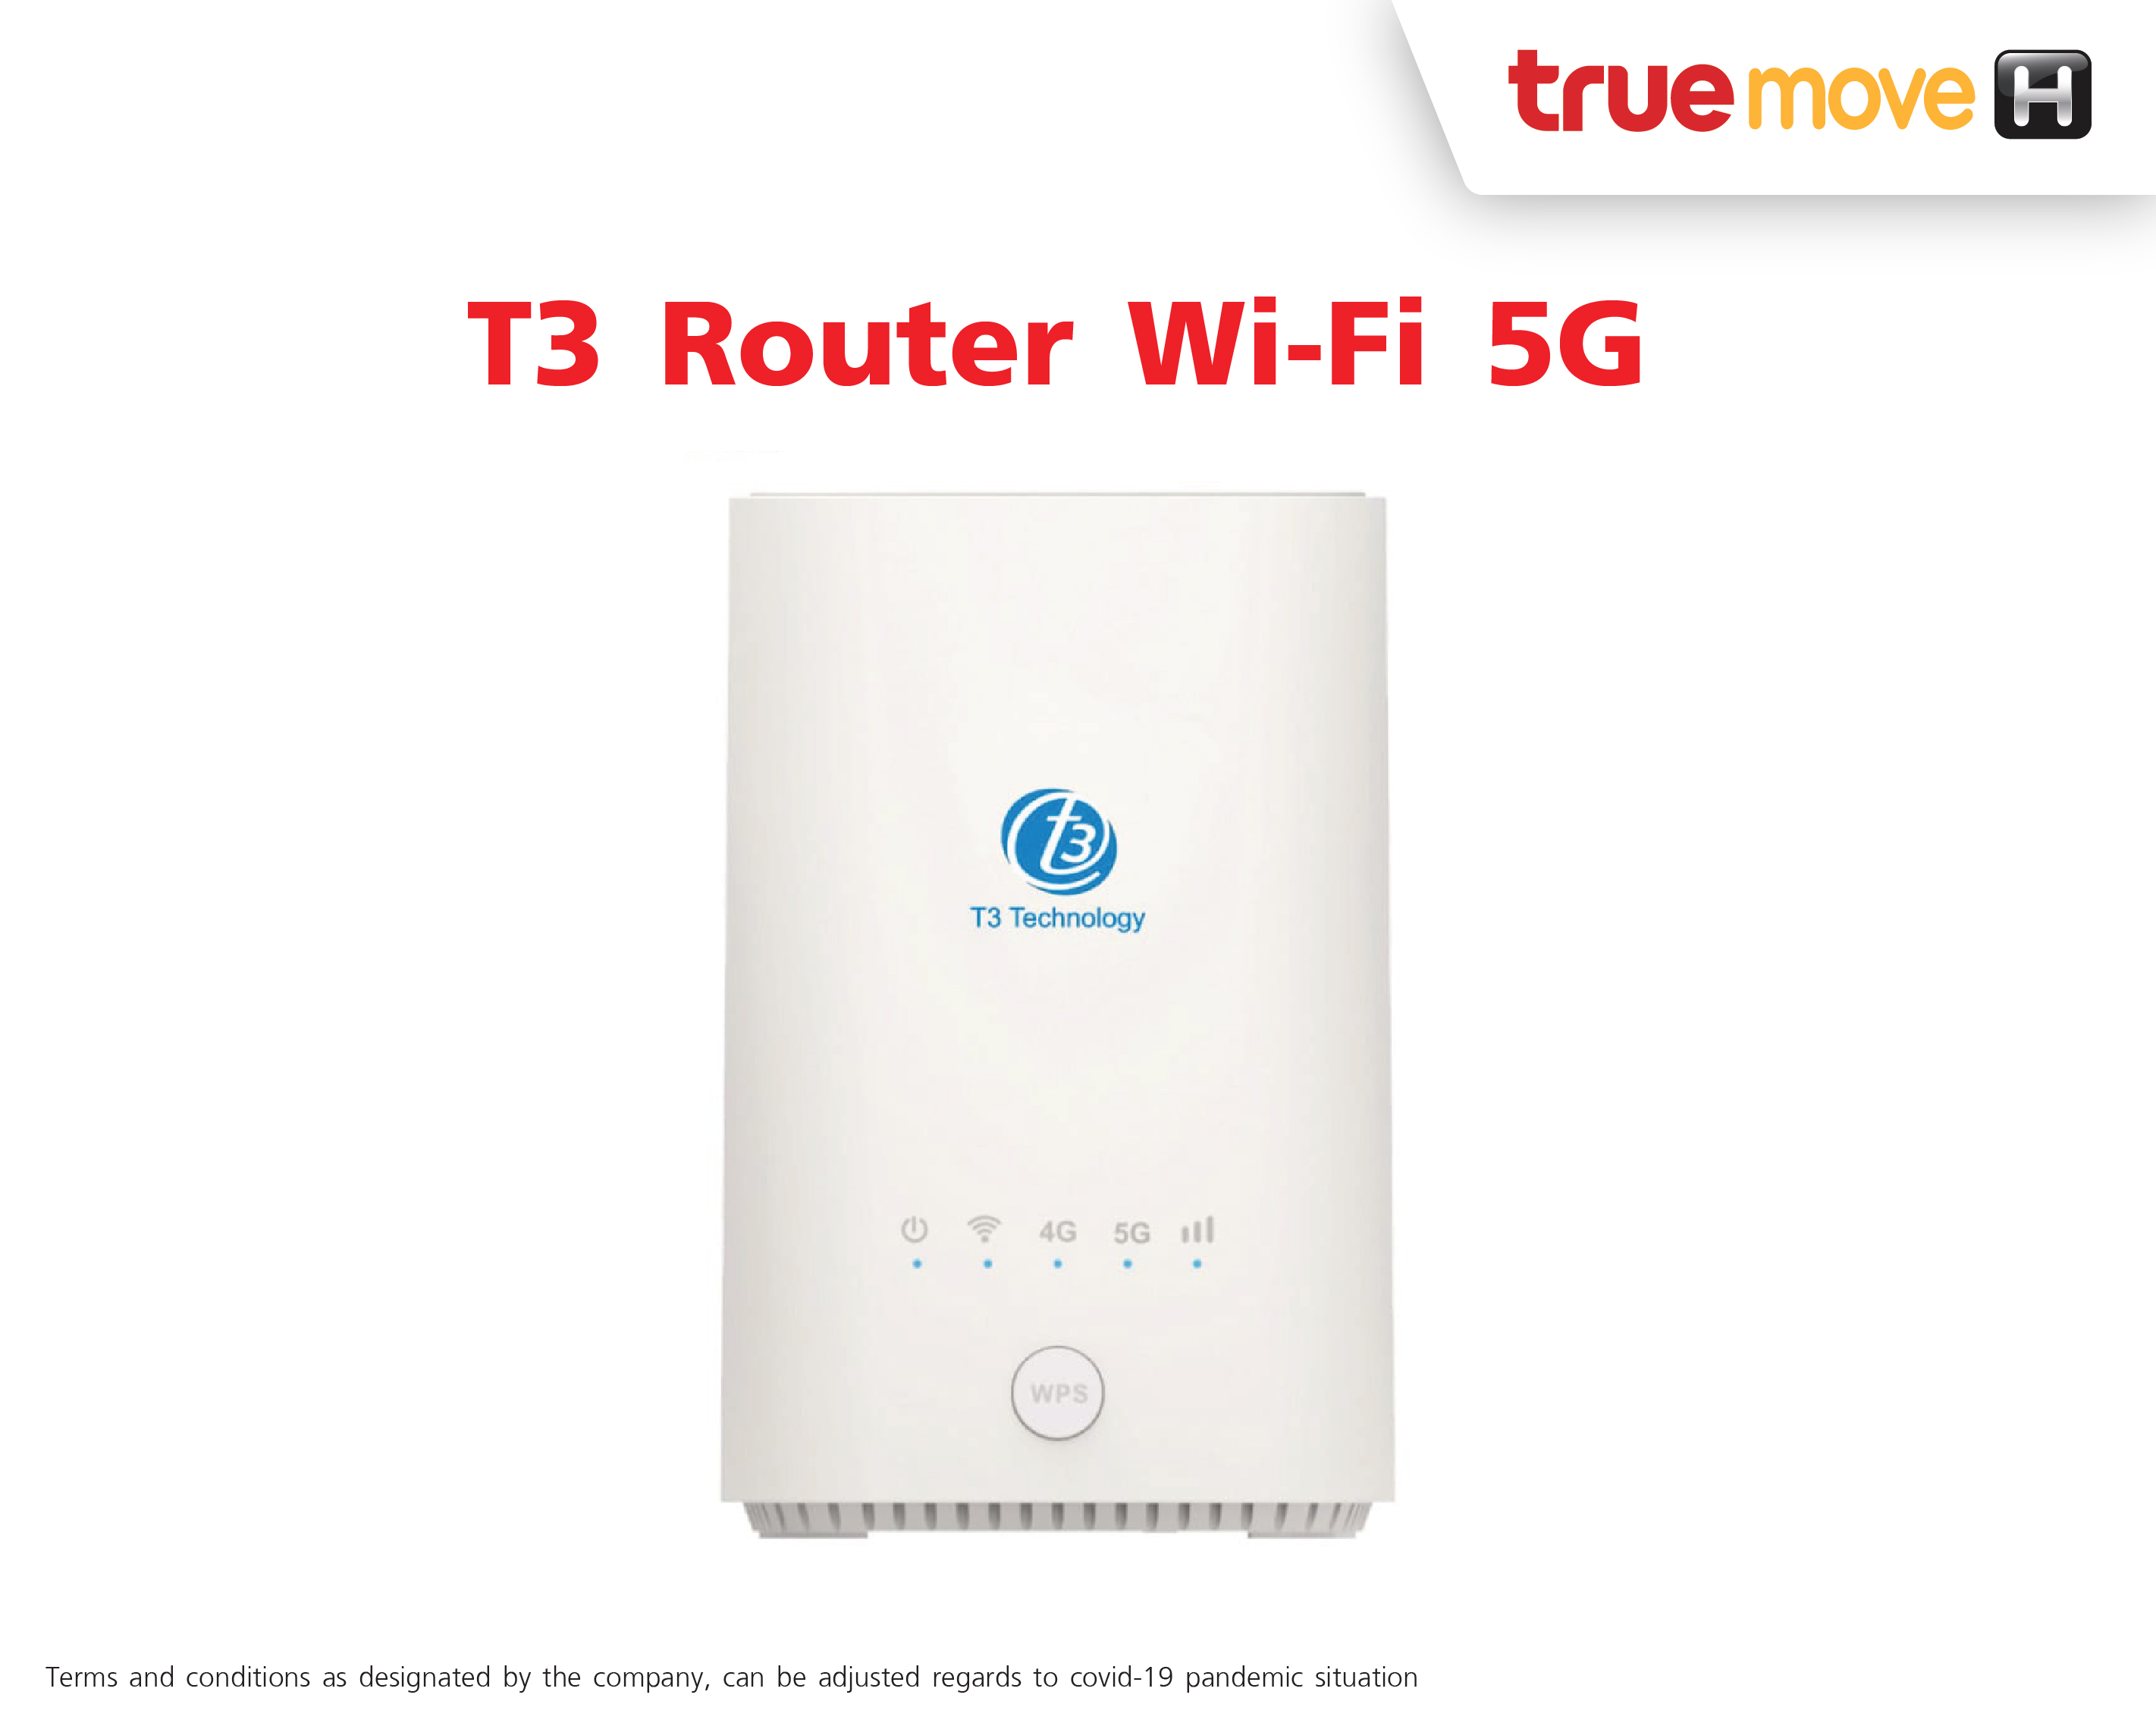 T3 Router Wi-Fi 5G